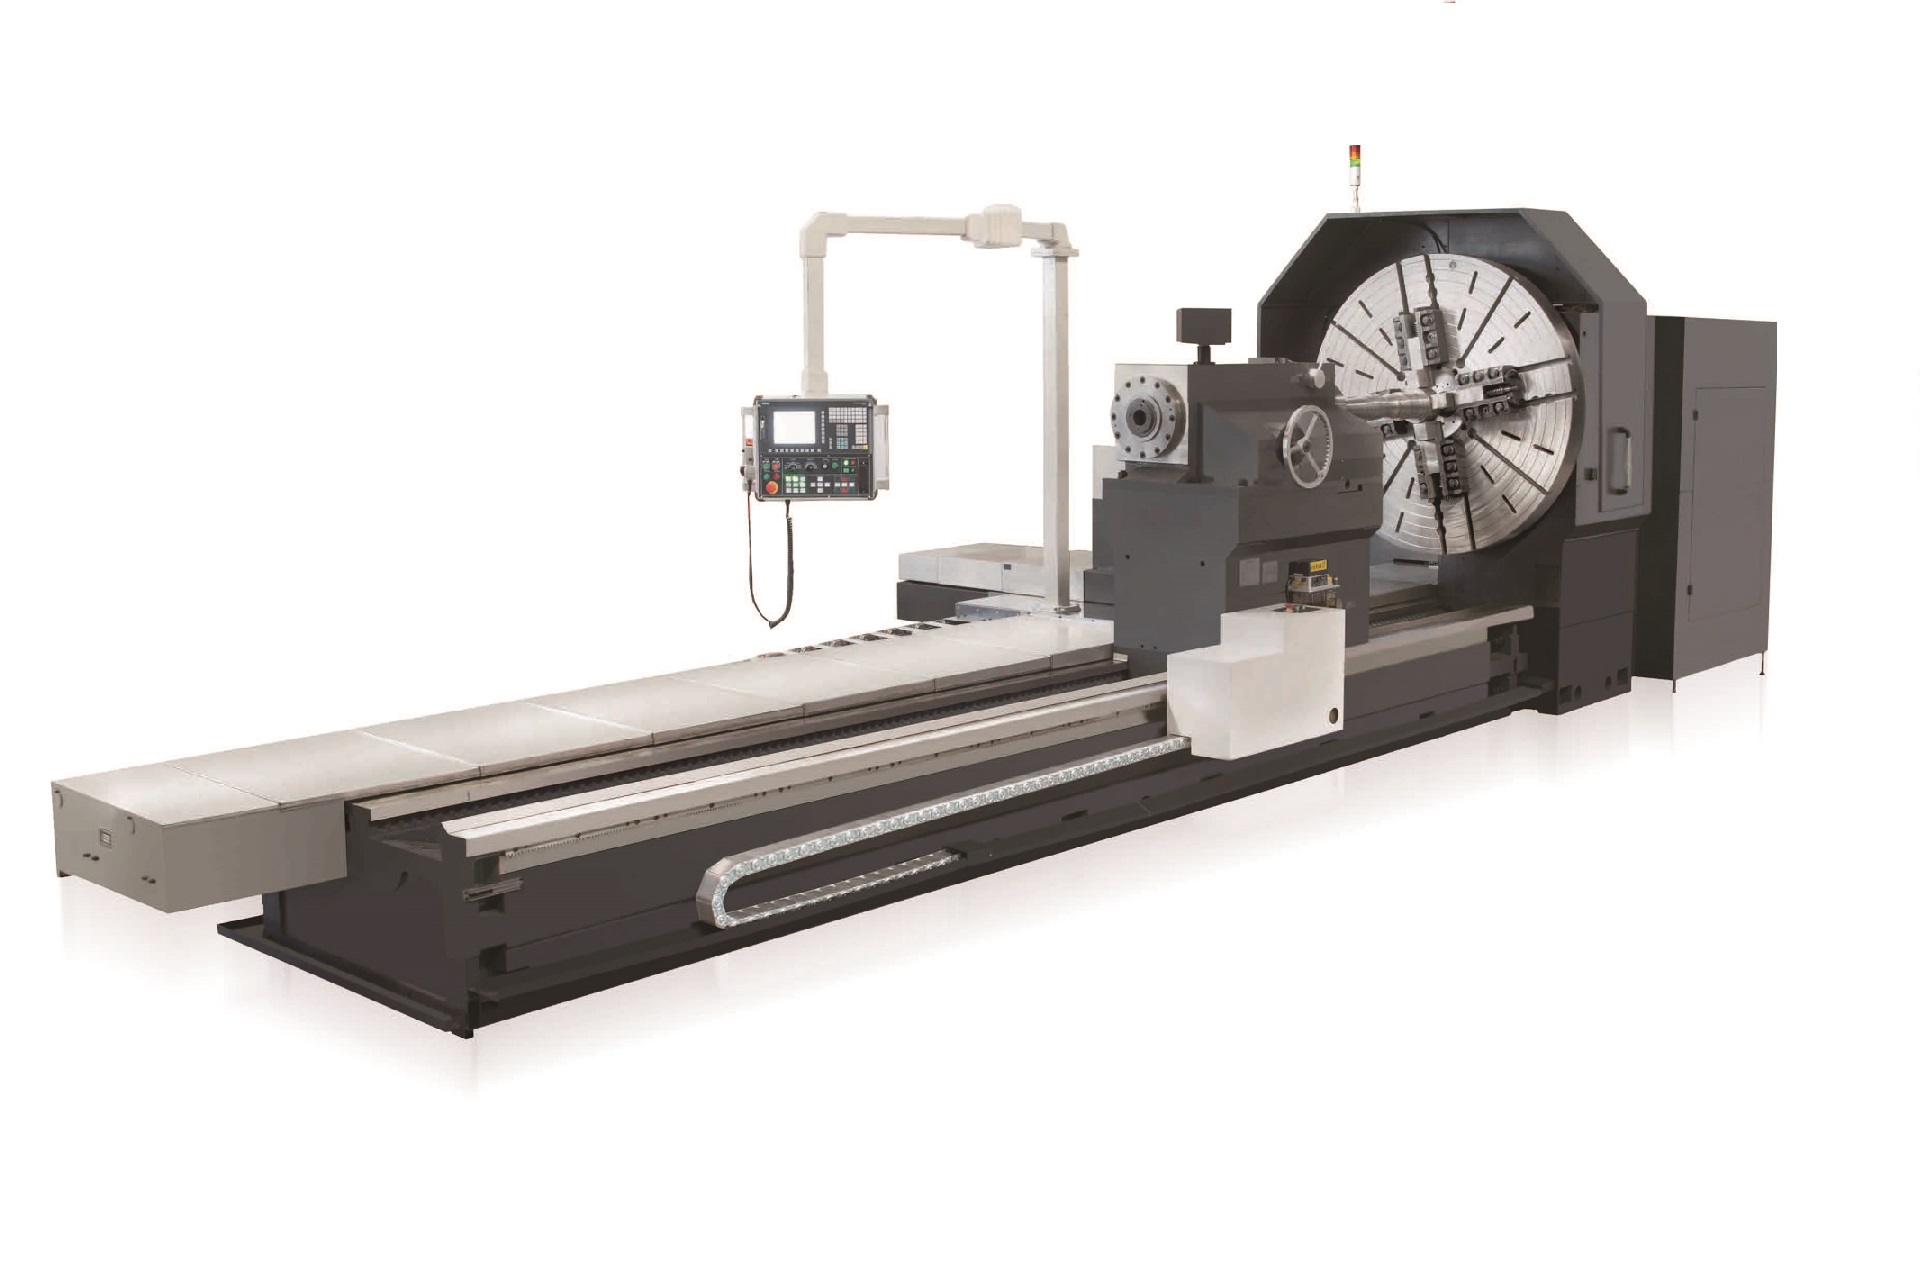 Flat Bed CNC Lathe Machine - Benefits, Where to Buy, and More